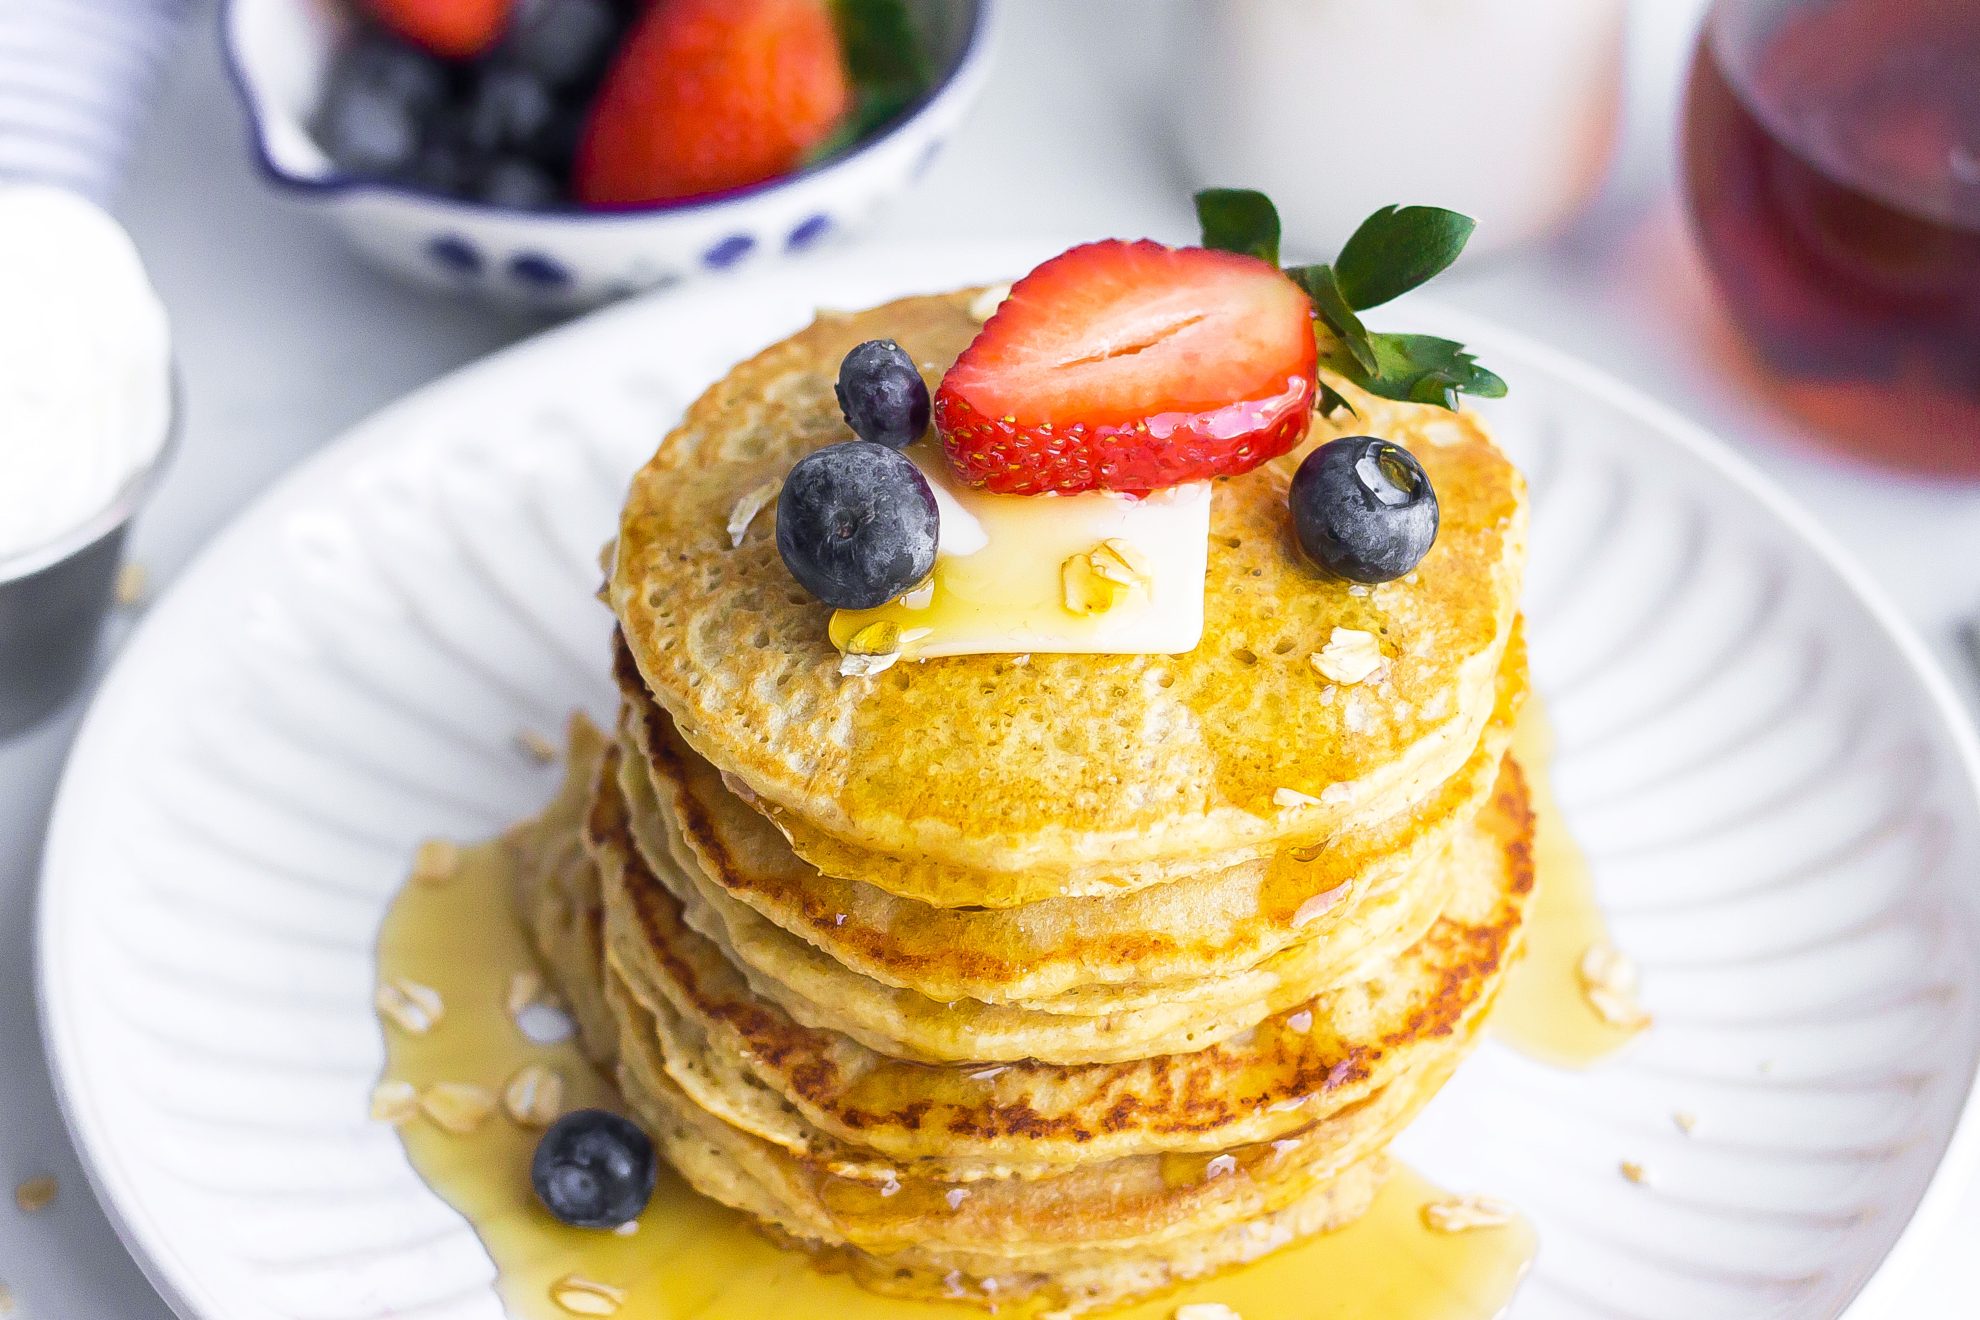 EASY Oatmeal Pancakes Recipe: Simple Ingredients & Only 15 Minutes!